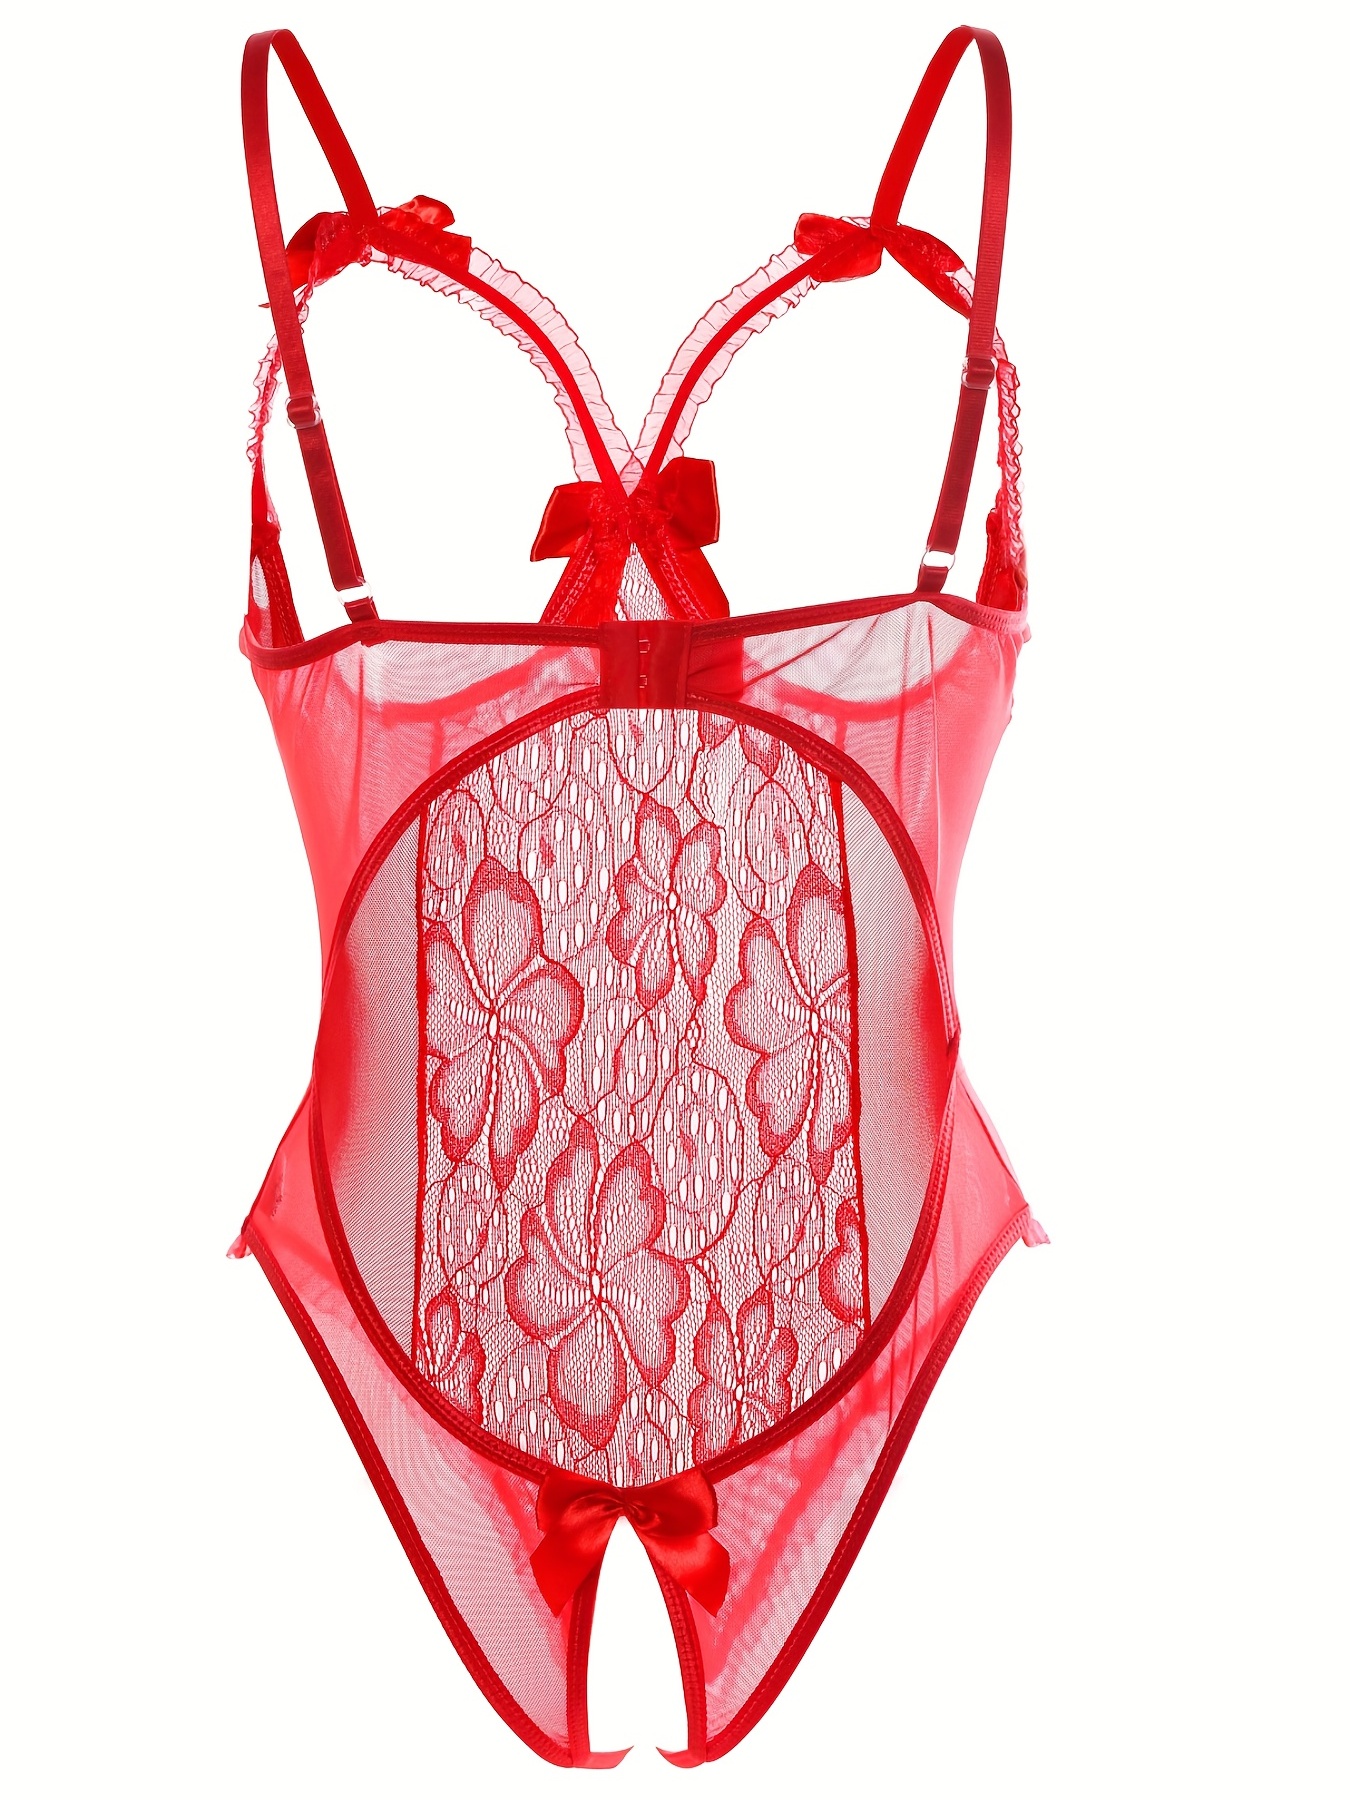 Sexy Surprise Peek-a-Boo Ribbon Floral Lace Open Back Teddy